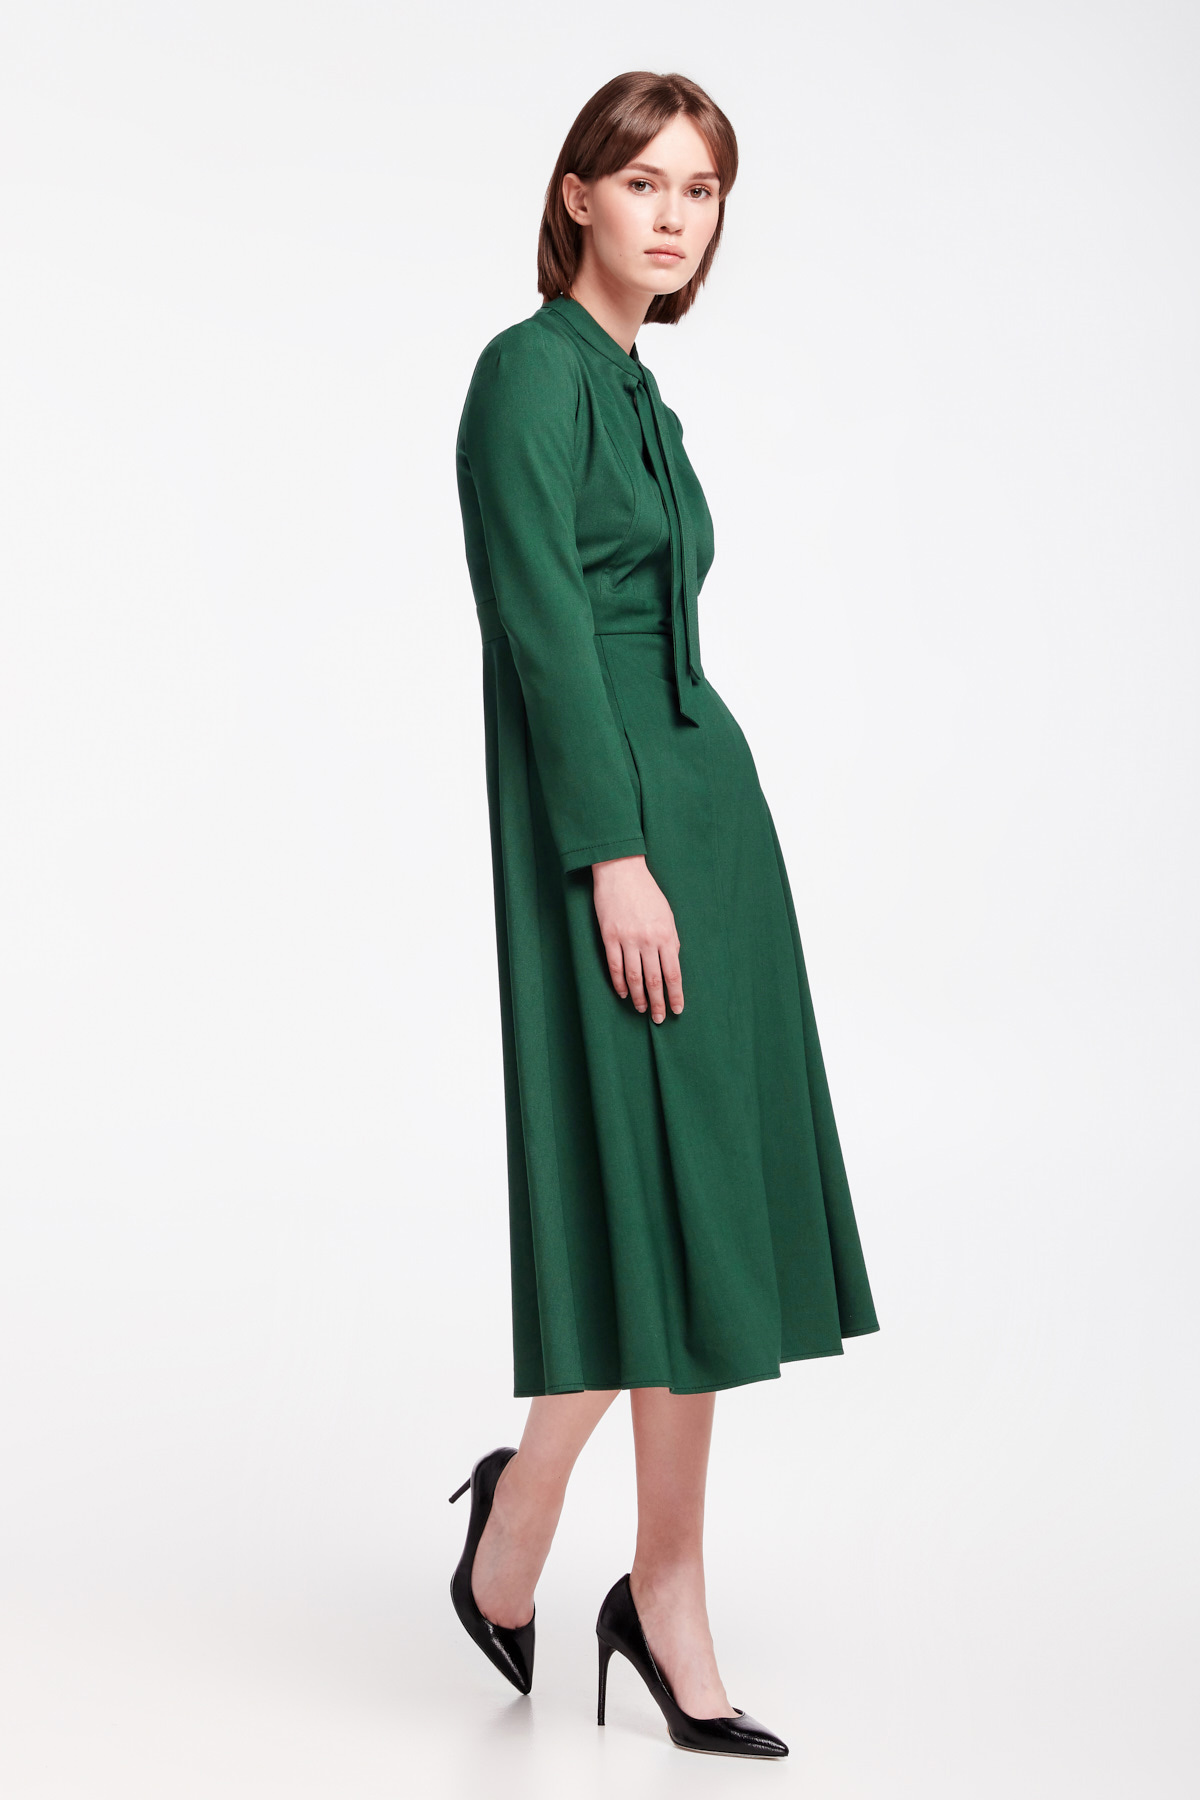 Green dress with a bow, photo 13